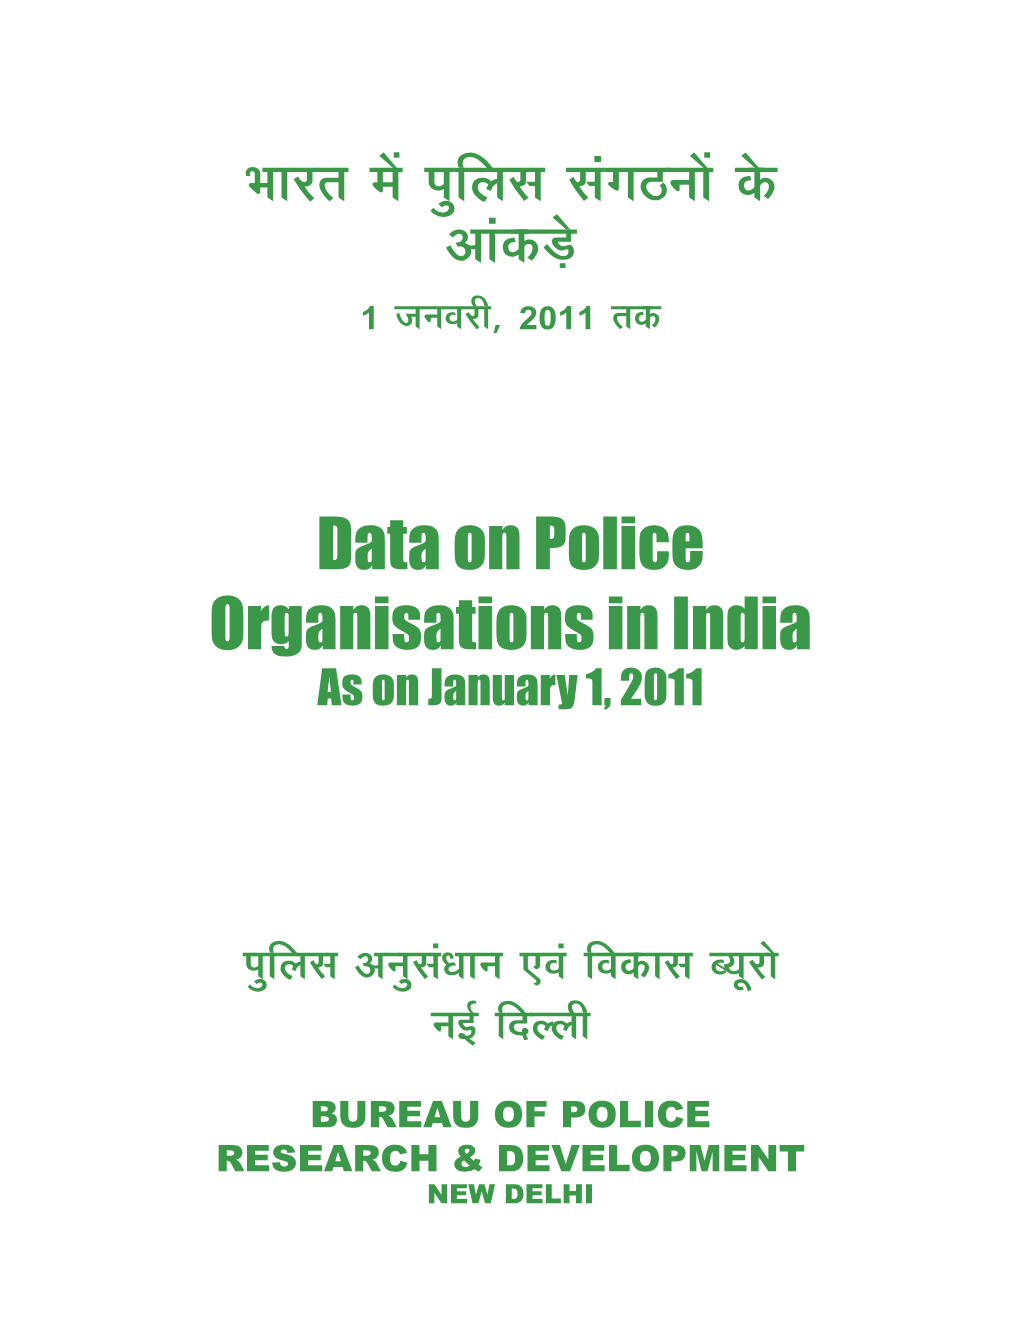 Data on Police Organisations in India As on January 1, 2011